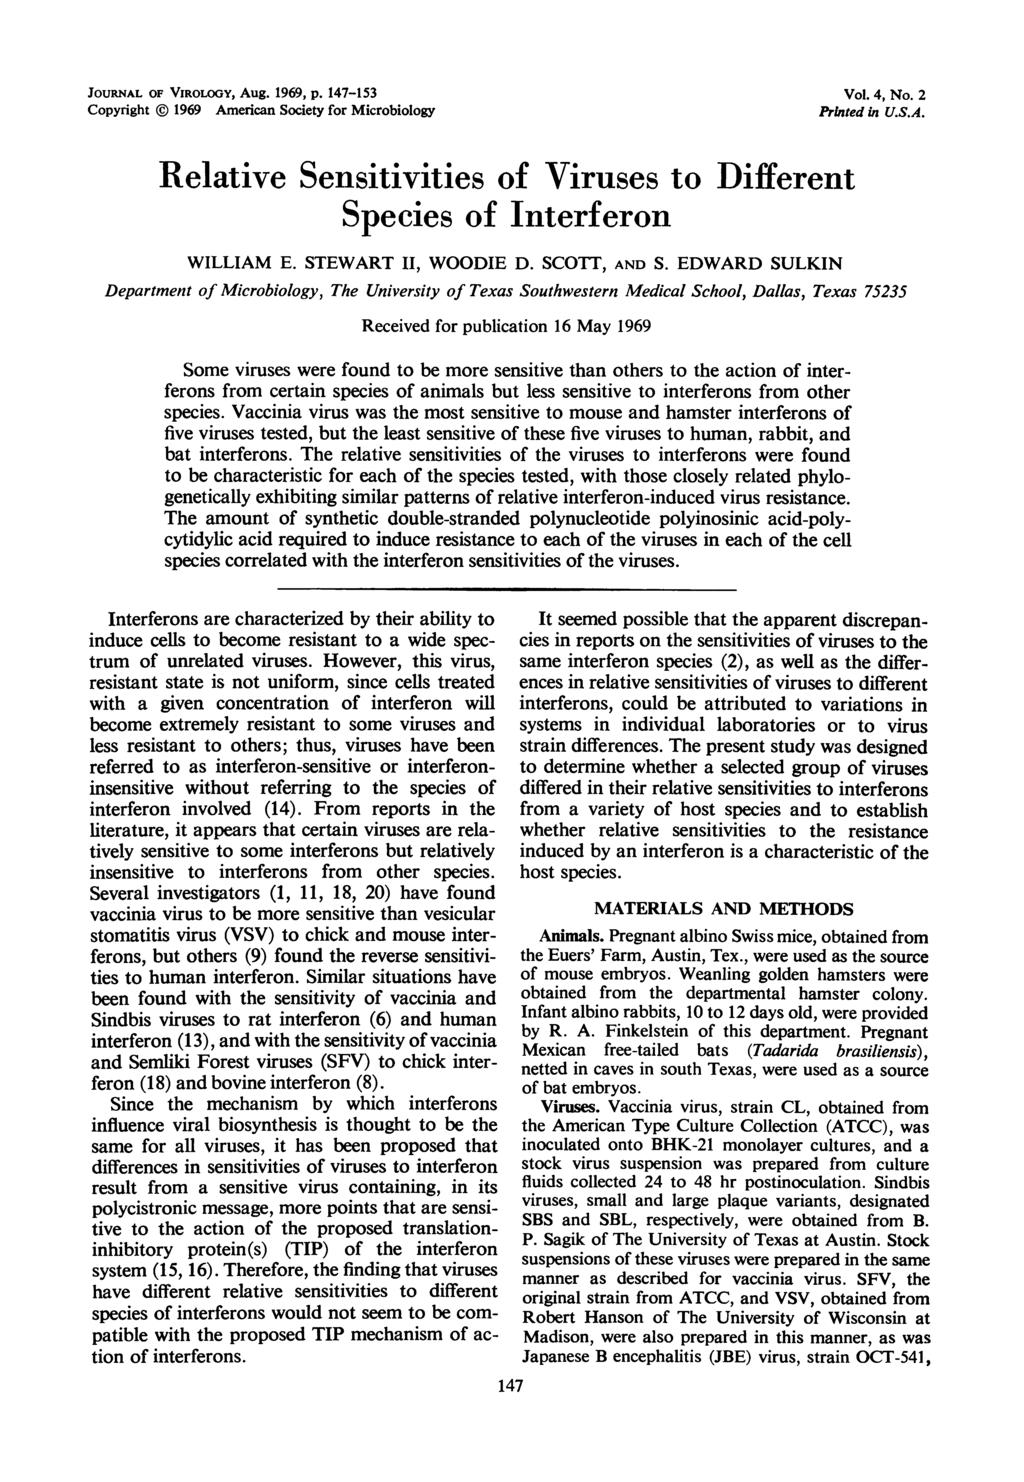 JOURNAL OF VIROLOGY, Aug. 1969, P. 147-153 Copyright 1969 American Society for Microbiology Vol. 4, No. 2 Printed in U.S.A. Relative Sensitivities of Viruses to Different Species of Interferon WILLIAM E.